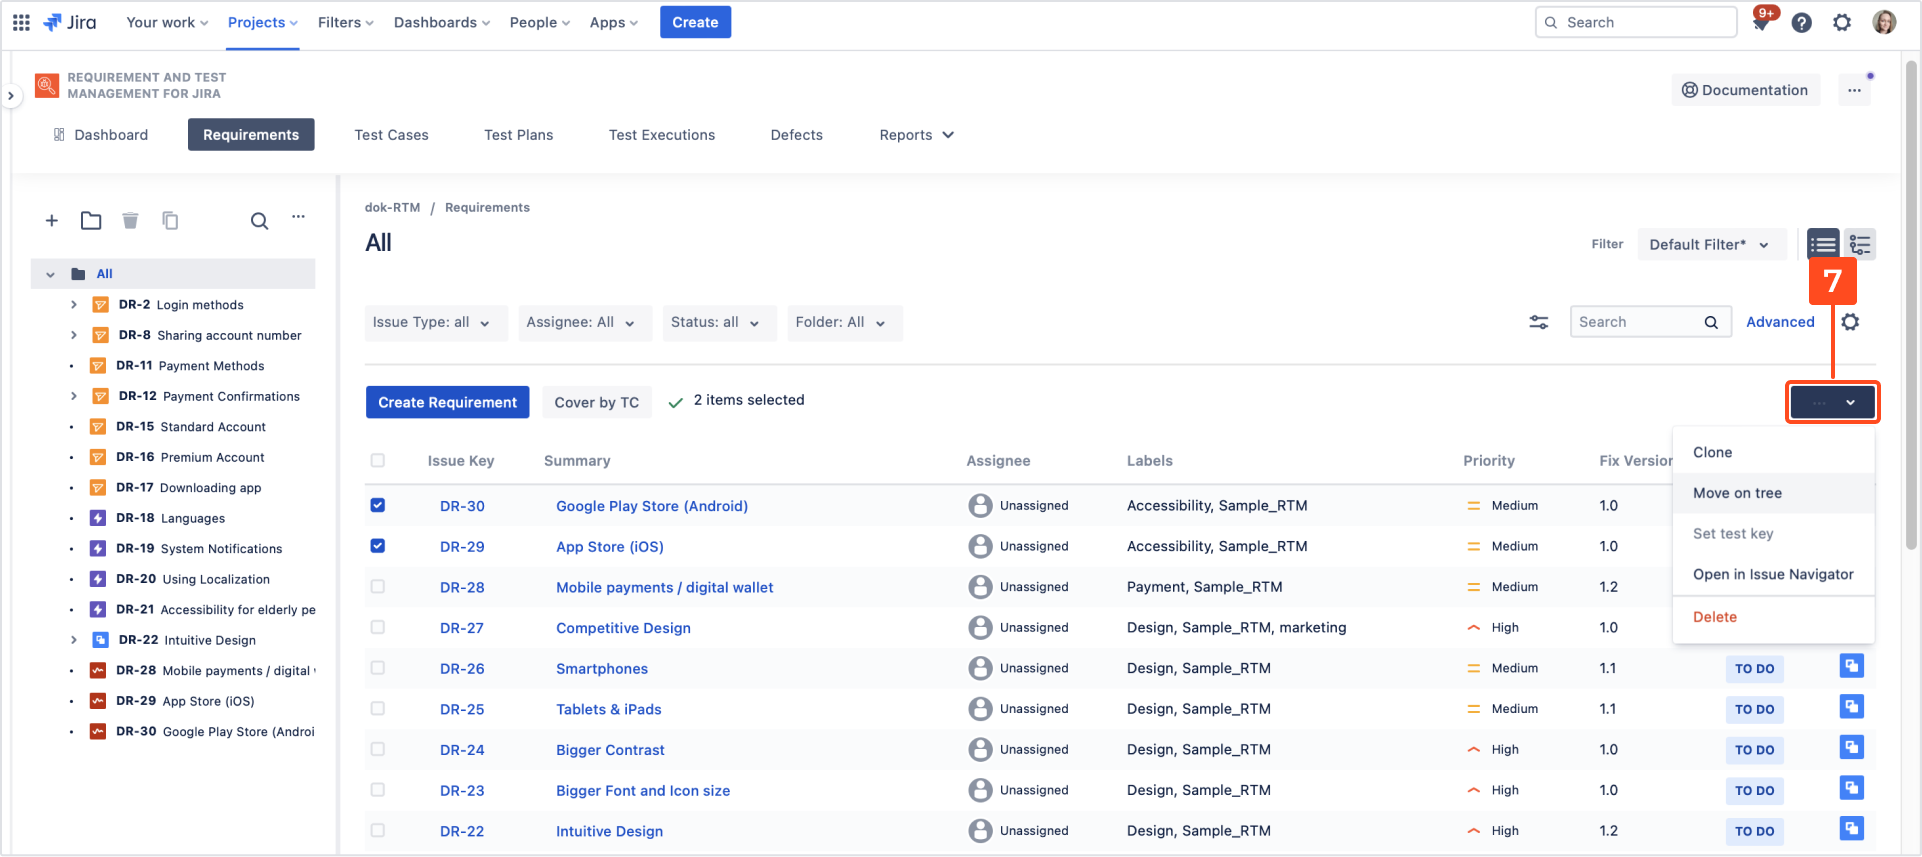 Explore navigation tools in Requirements and Test Management for Jira app